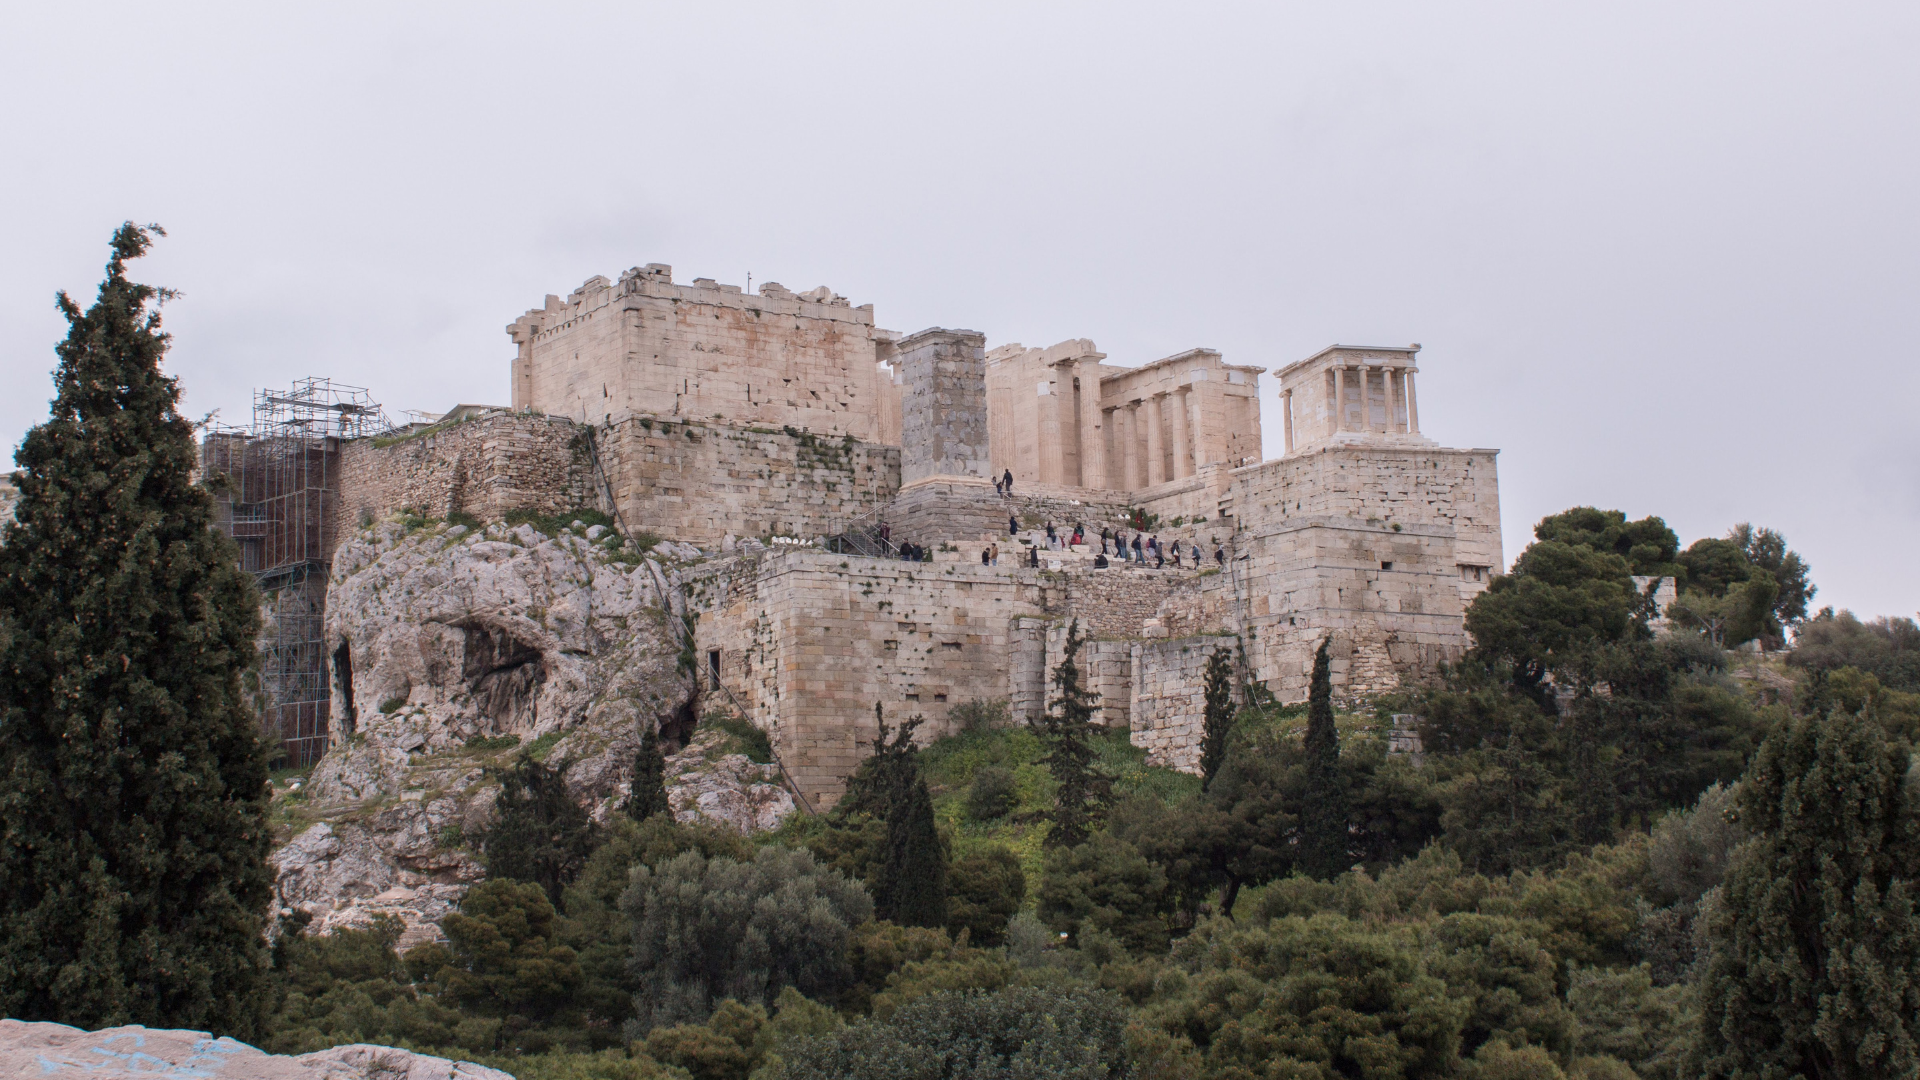 The Acropolis of Athens on a cloudy day